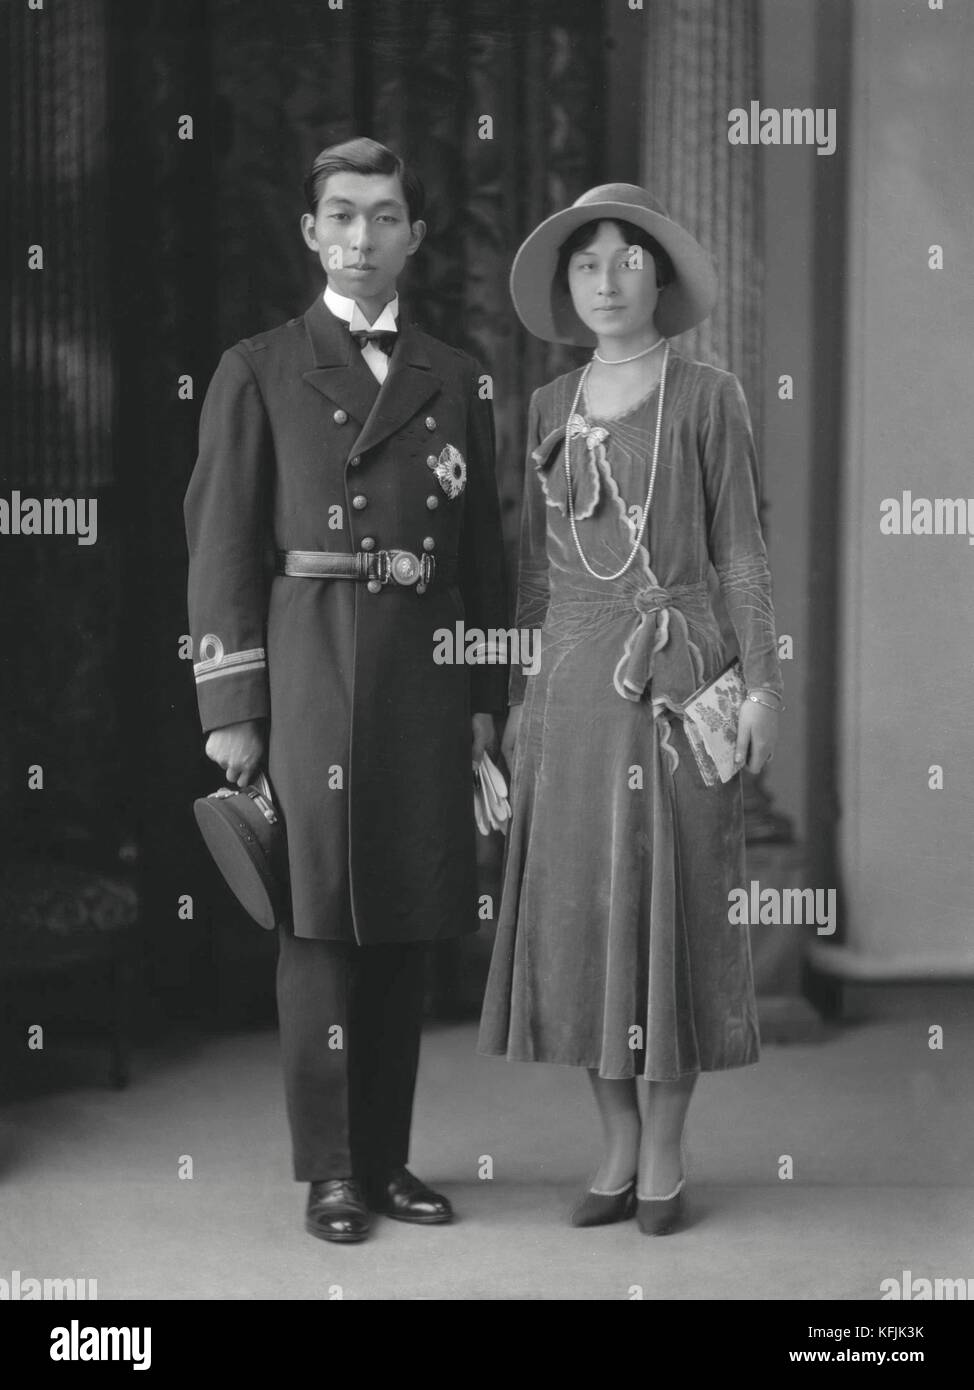 Imperial prince Nobuhito (1905-1987), brother of Emperor Shôwa (Hirohito) of Japan.  He poses with his wife, Princess Takamatsu.  c.1925    Photo Taponier Photo12.com - Coll. Taponier credit:Photo12/Coll. Taponier Stock Photo